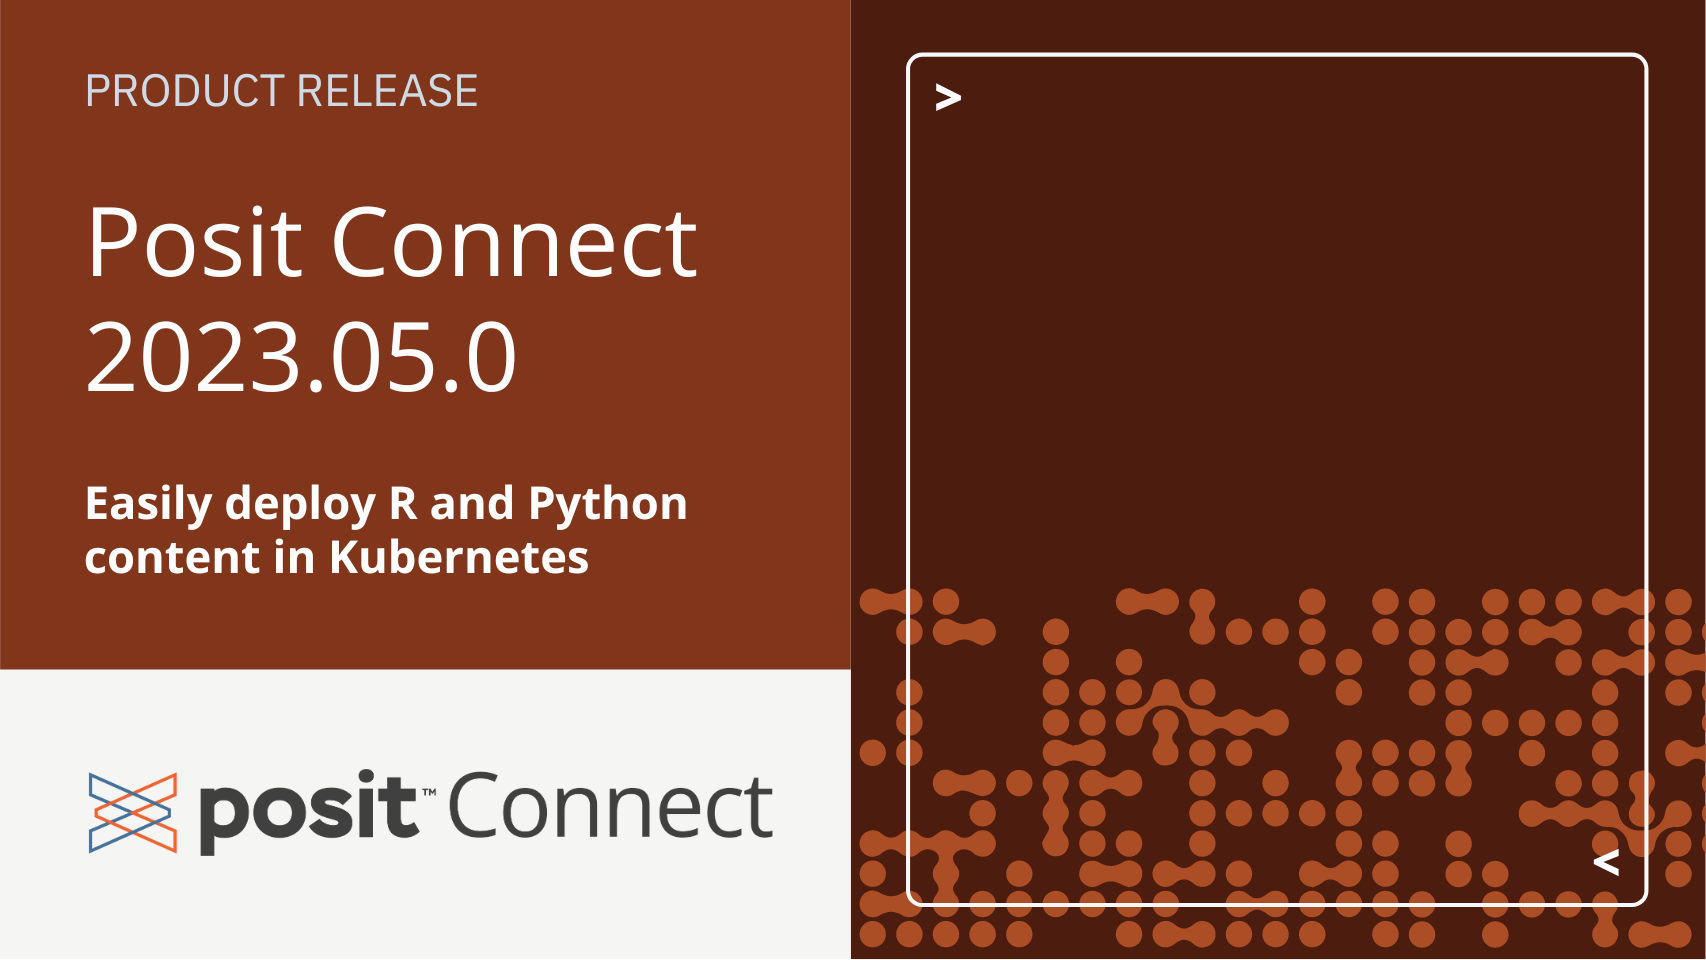 Text: Product Release, Posit Connect 2023.05.0, Easily deploy R and Python content in Kubernetes. The Posit Connect logo is underneath.